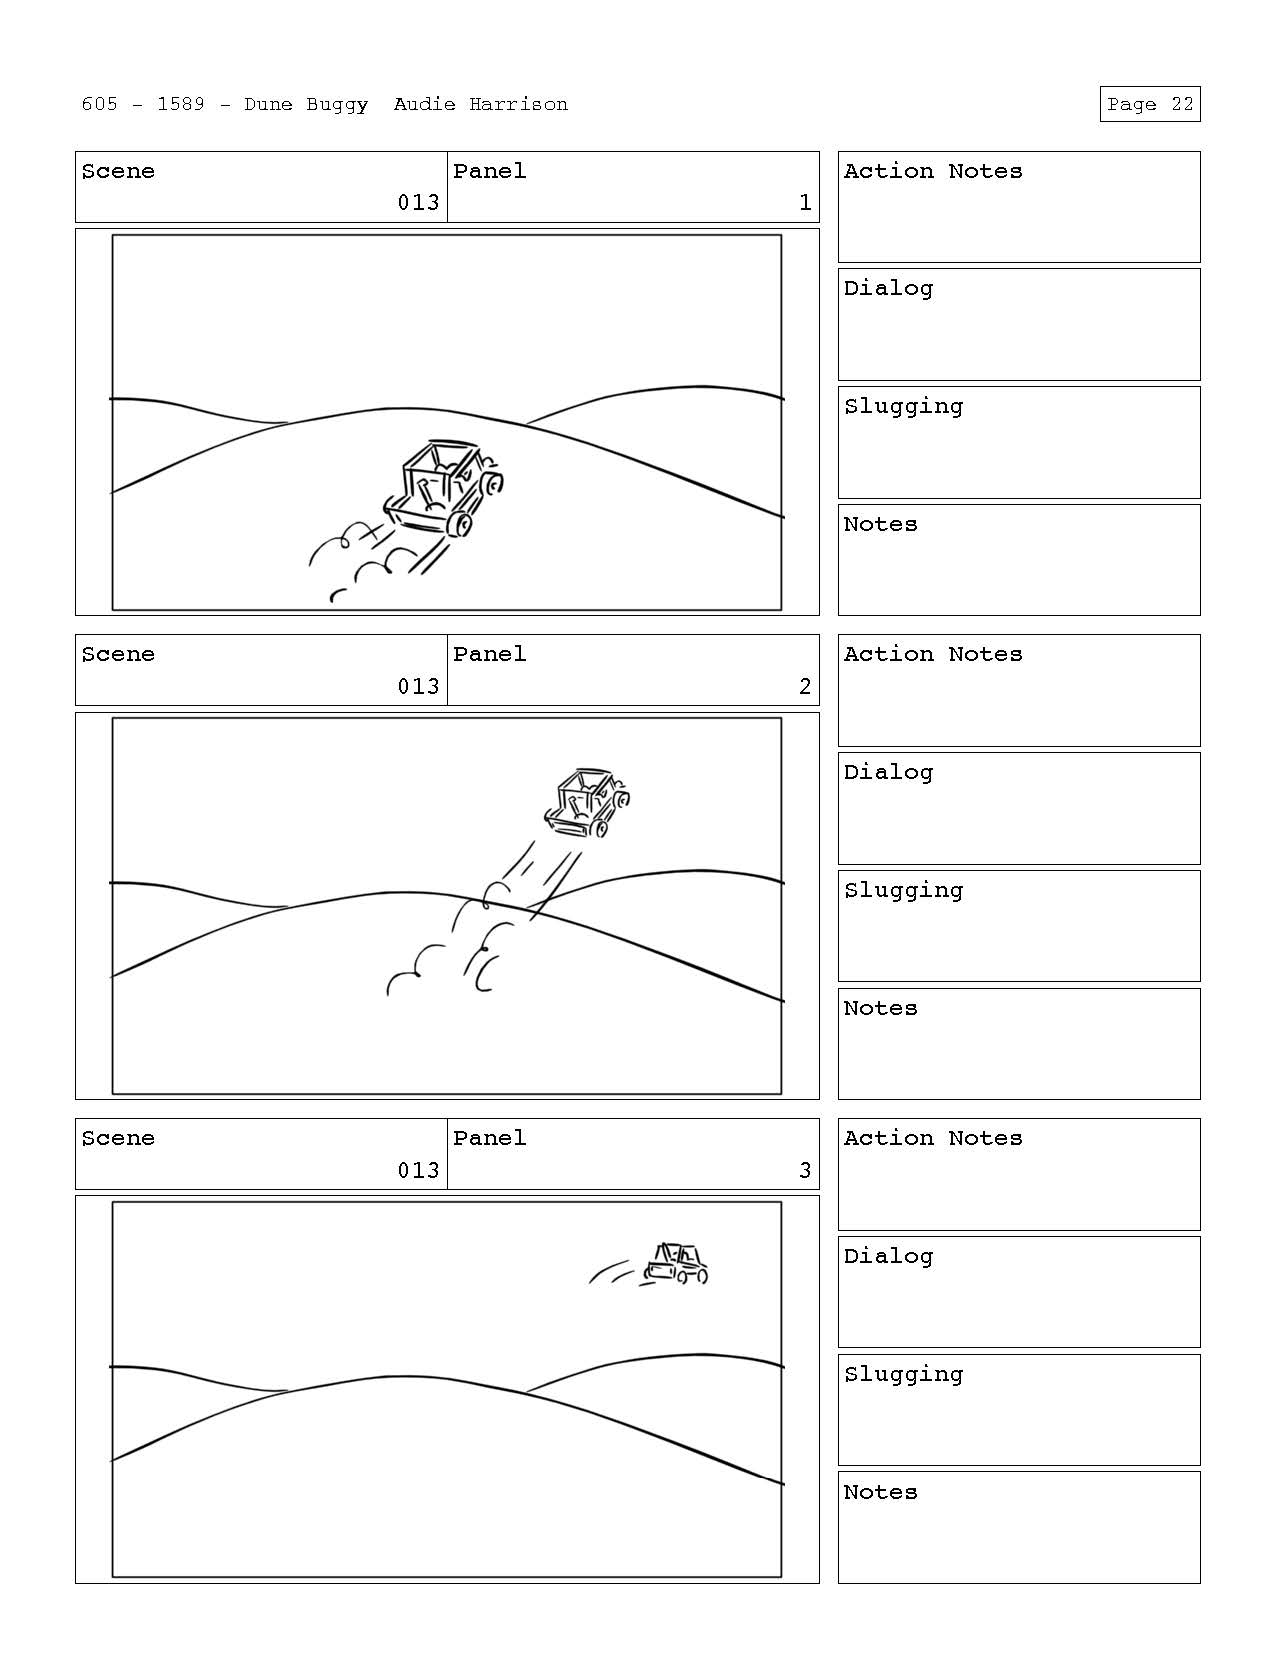 Dune_Buggy_Page_23.jpg